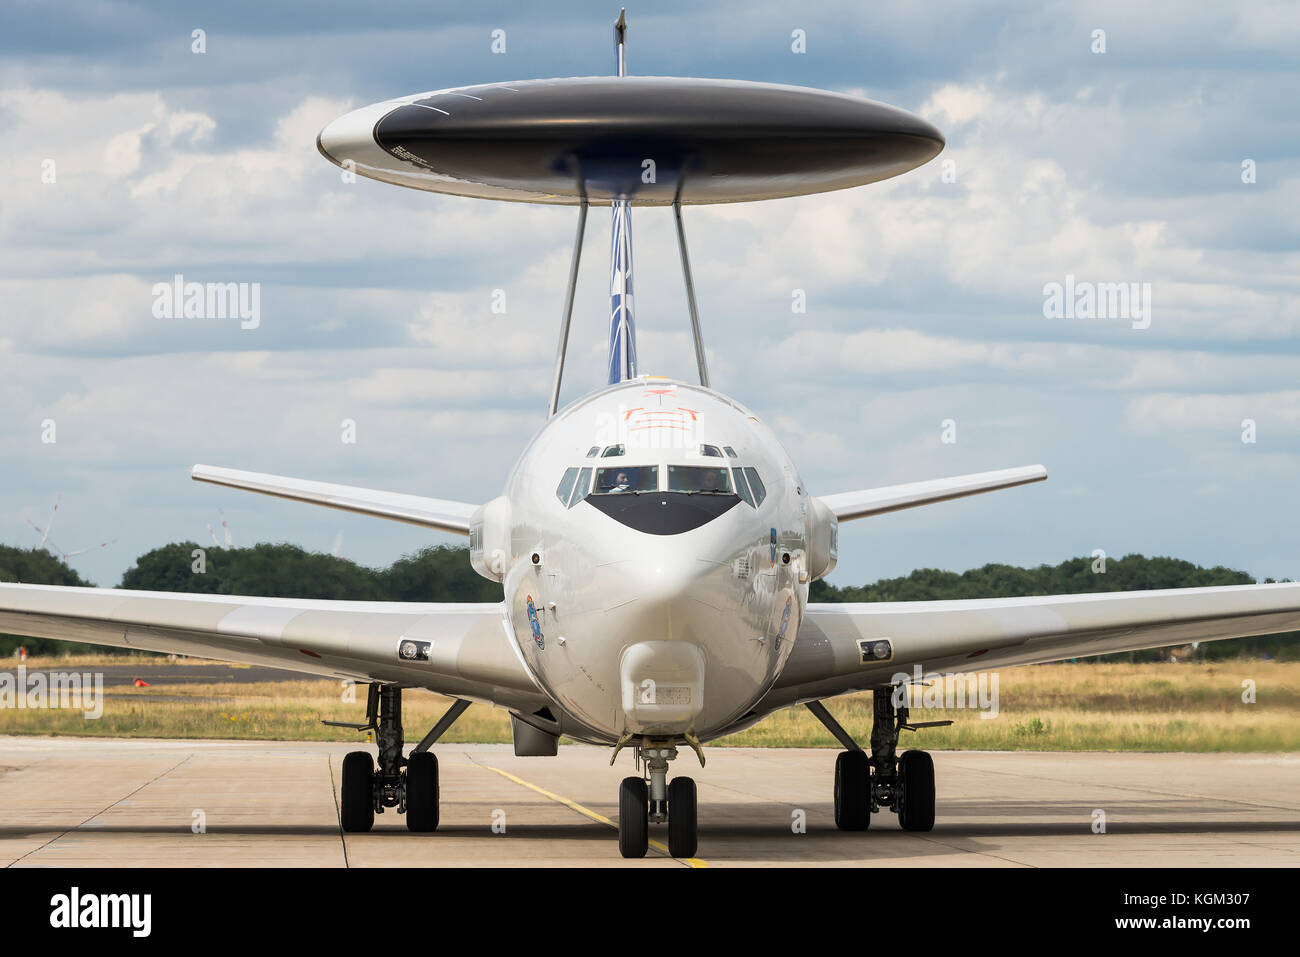 The Boeing E-3A Sentry, commonly known as AWACS, is an American airborne early warning and control aircraft developed by Boeing. Stock Photo